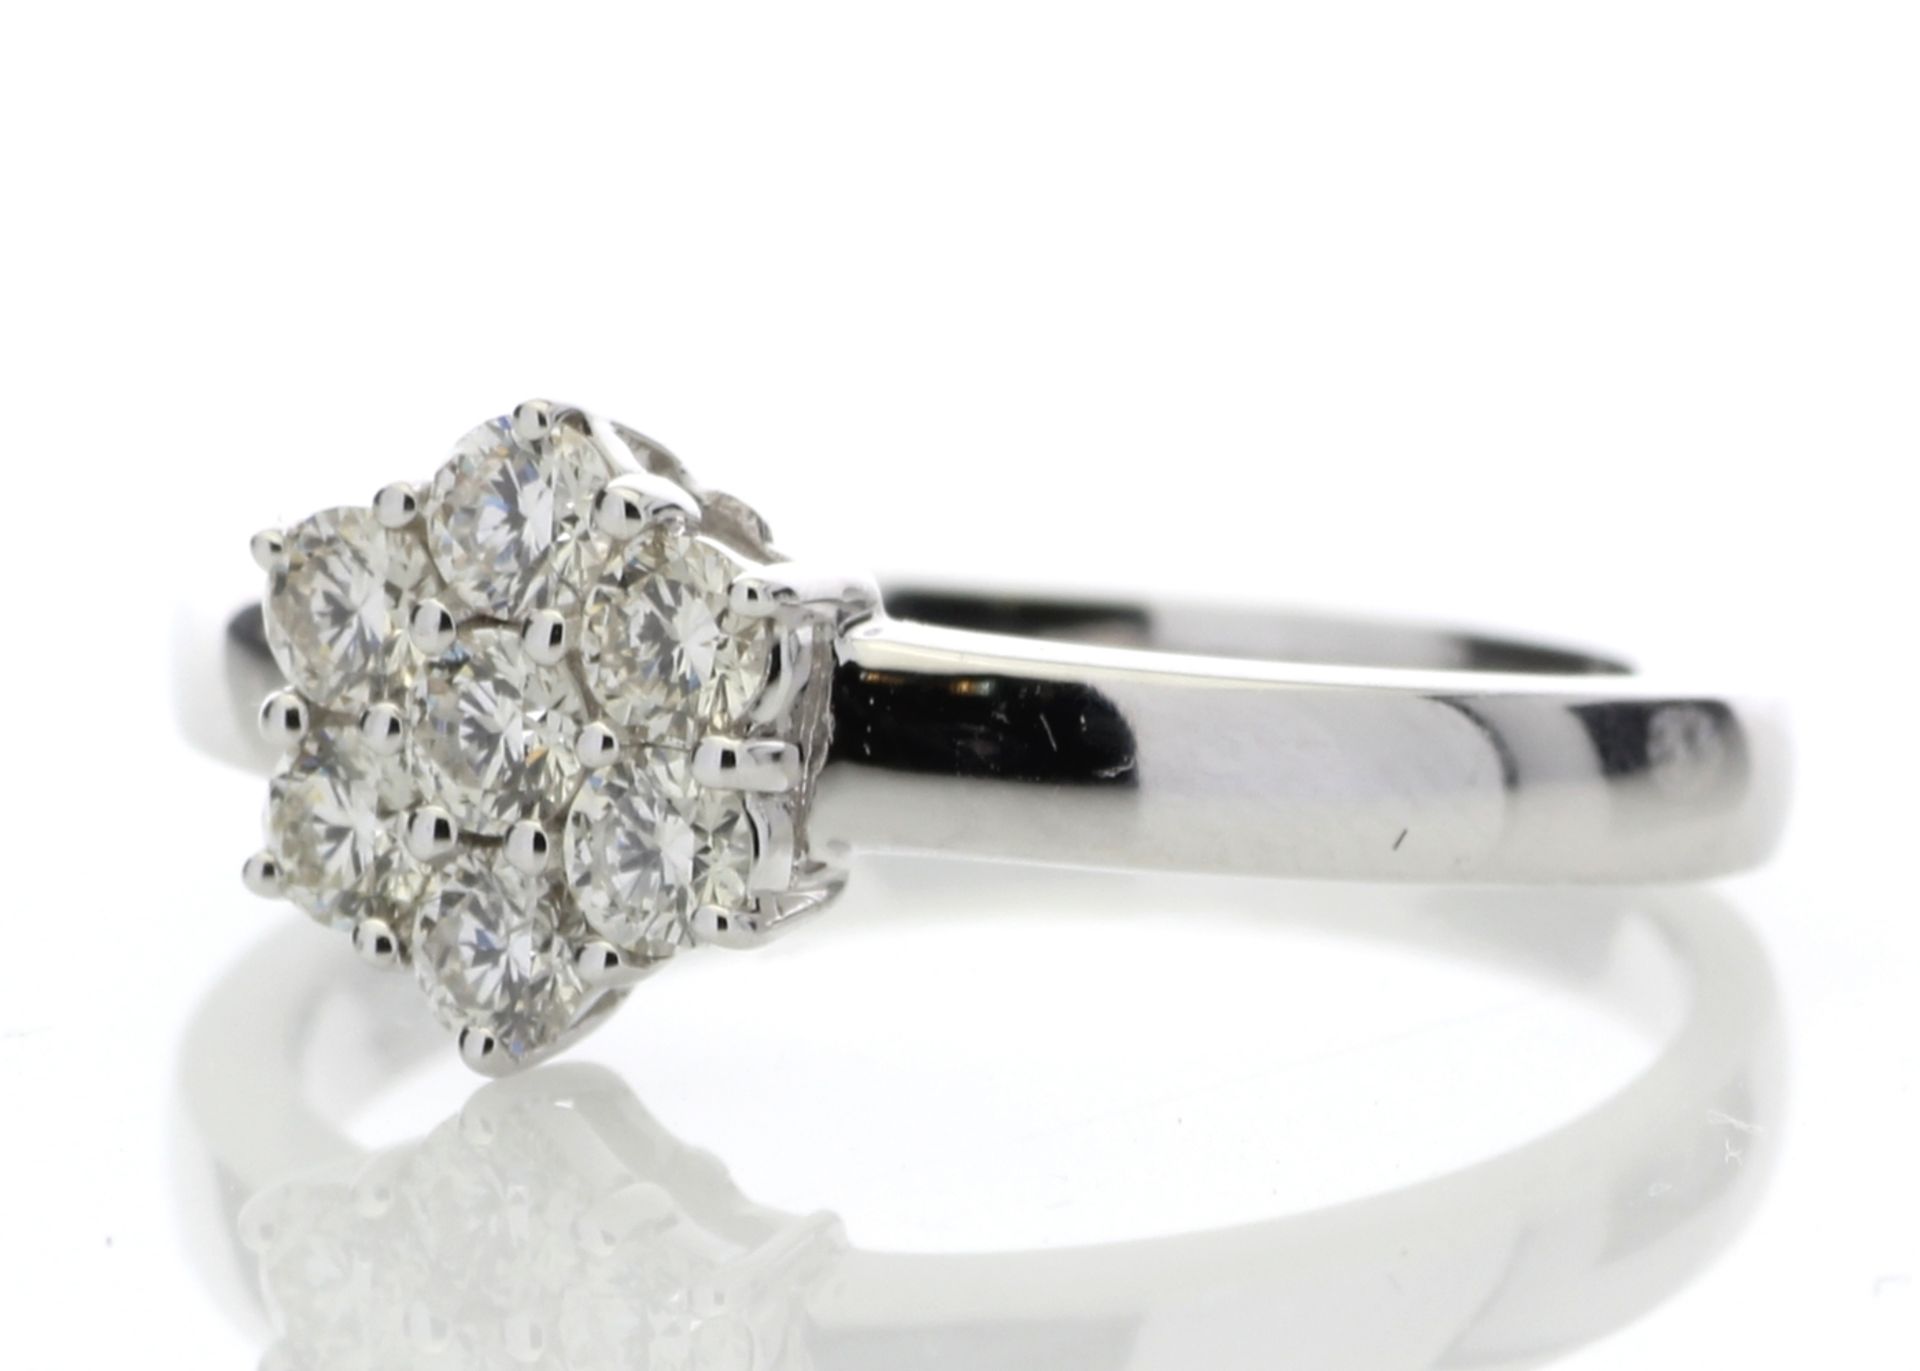 9ct White Gold Diamond Cluster Ring 0.45 Carats - Image 2 of 5